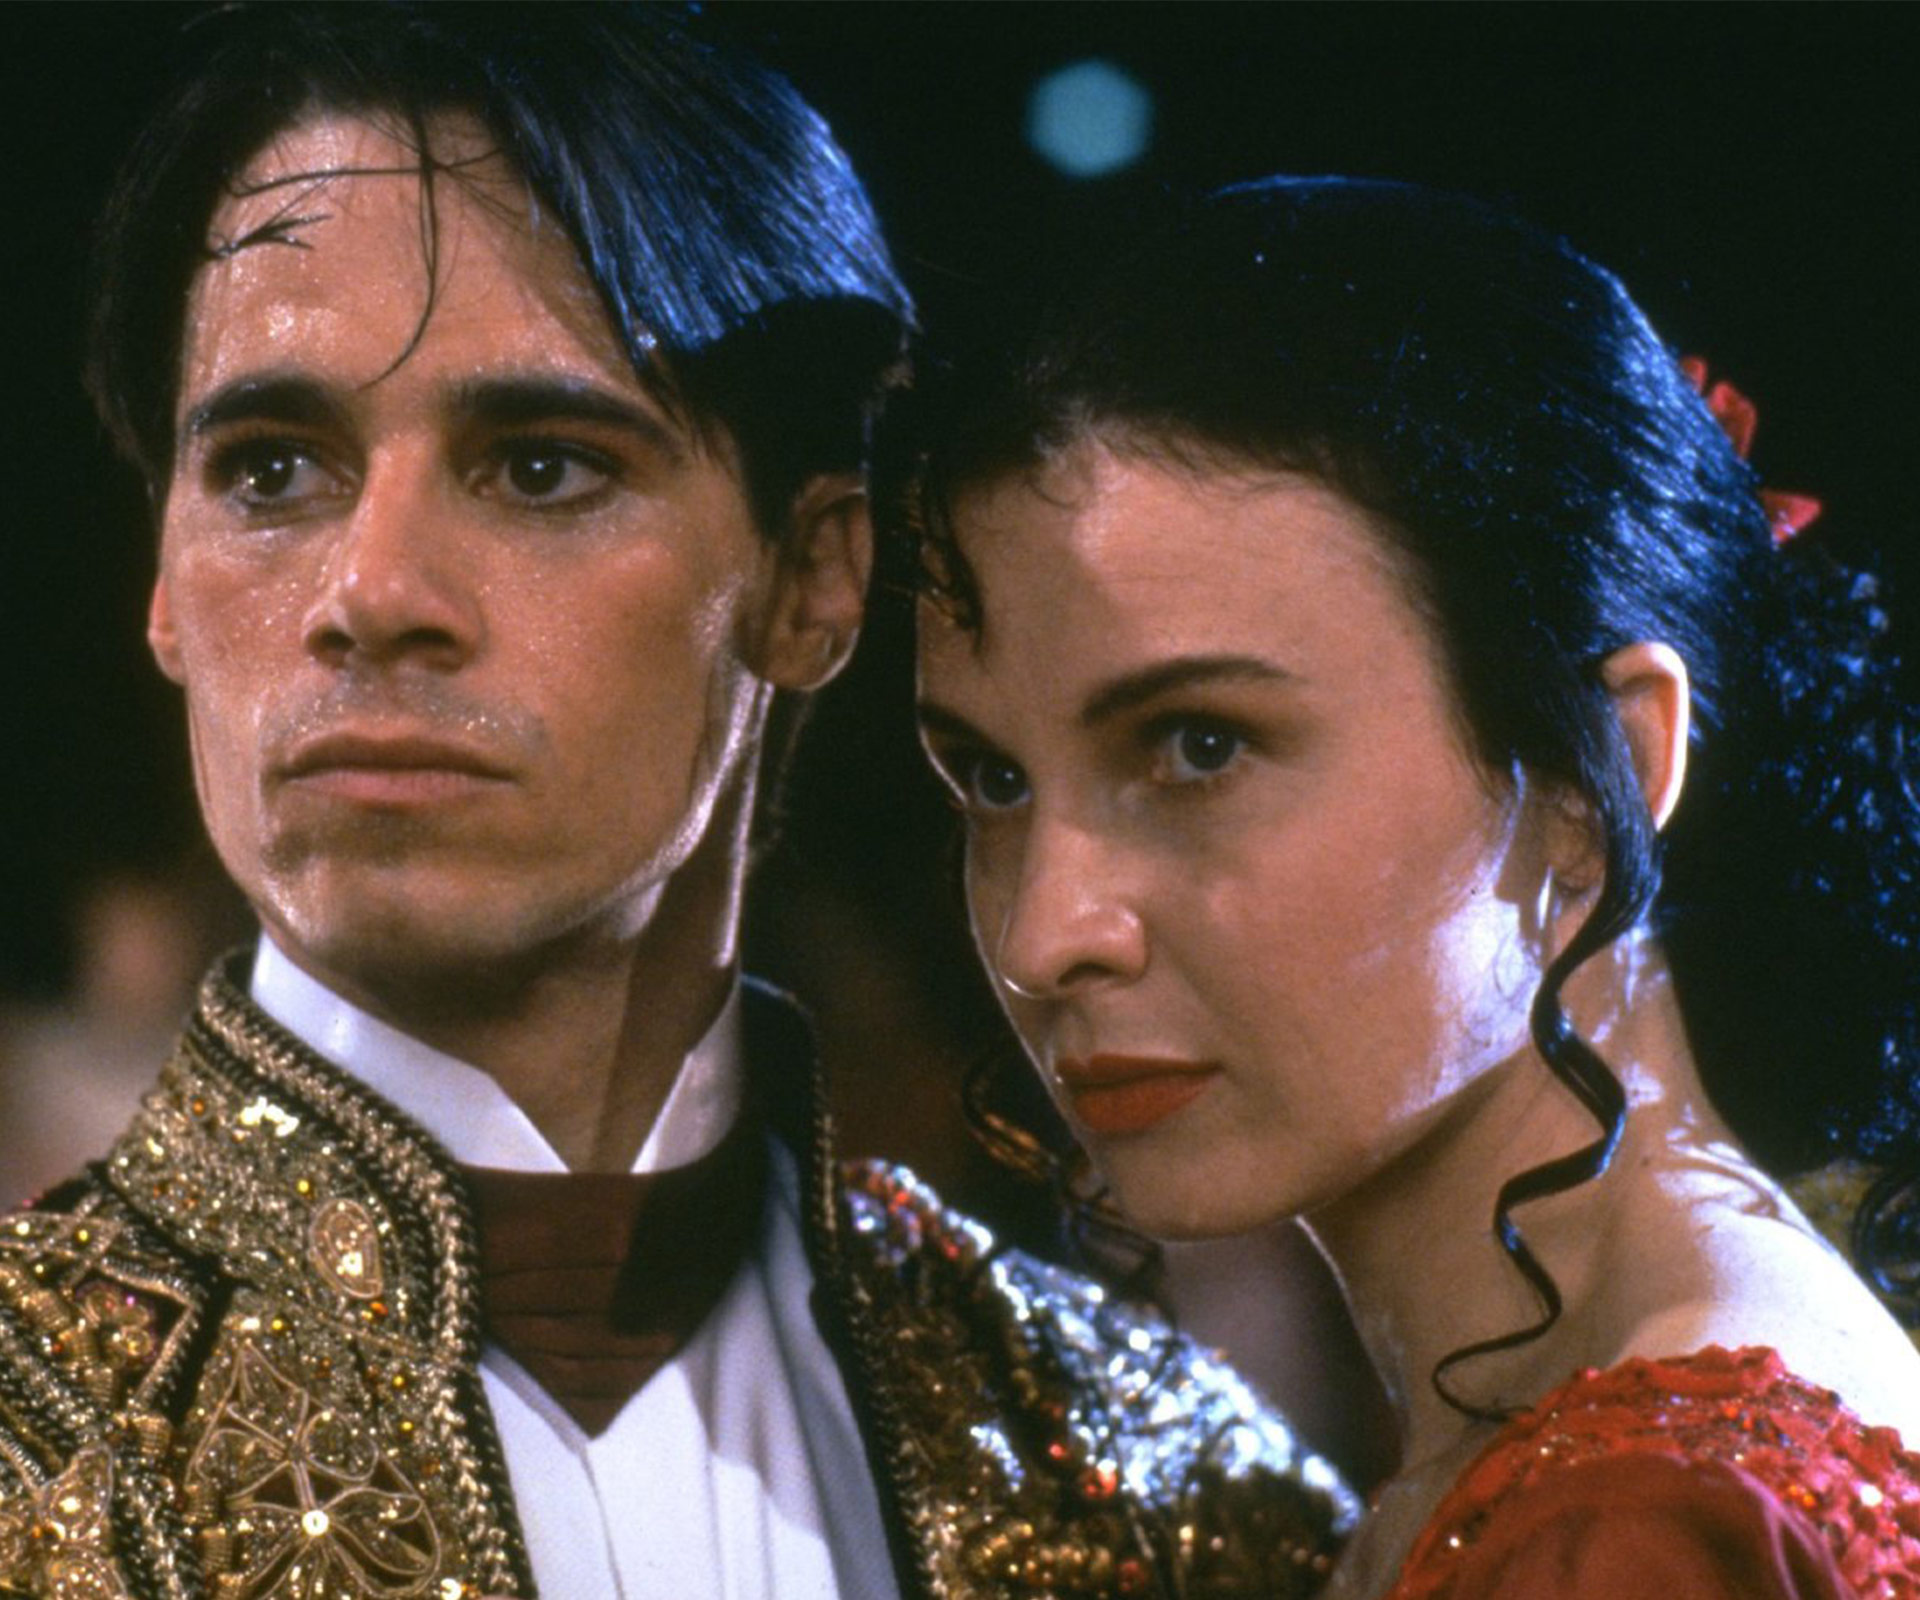 Strictly Ballroom: 23 years on… Where Are They Now?